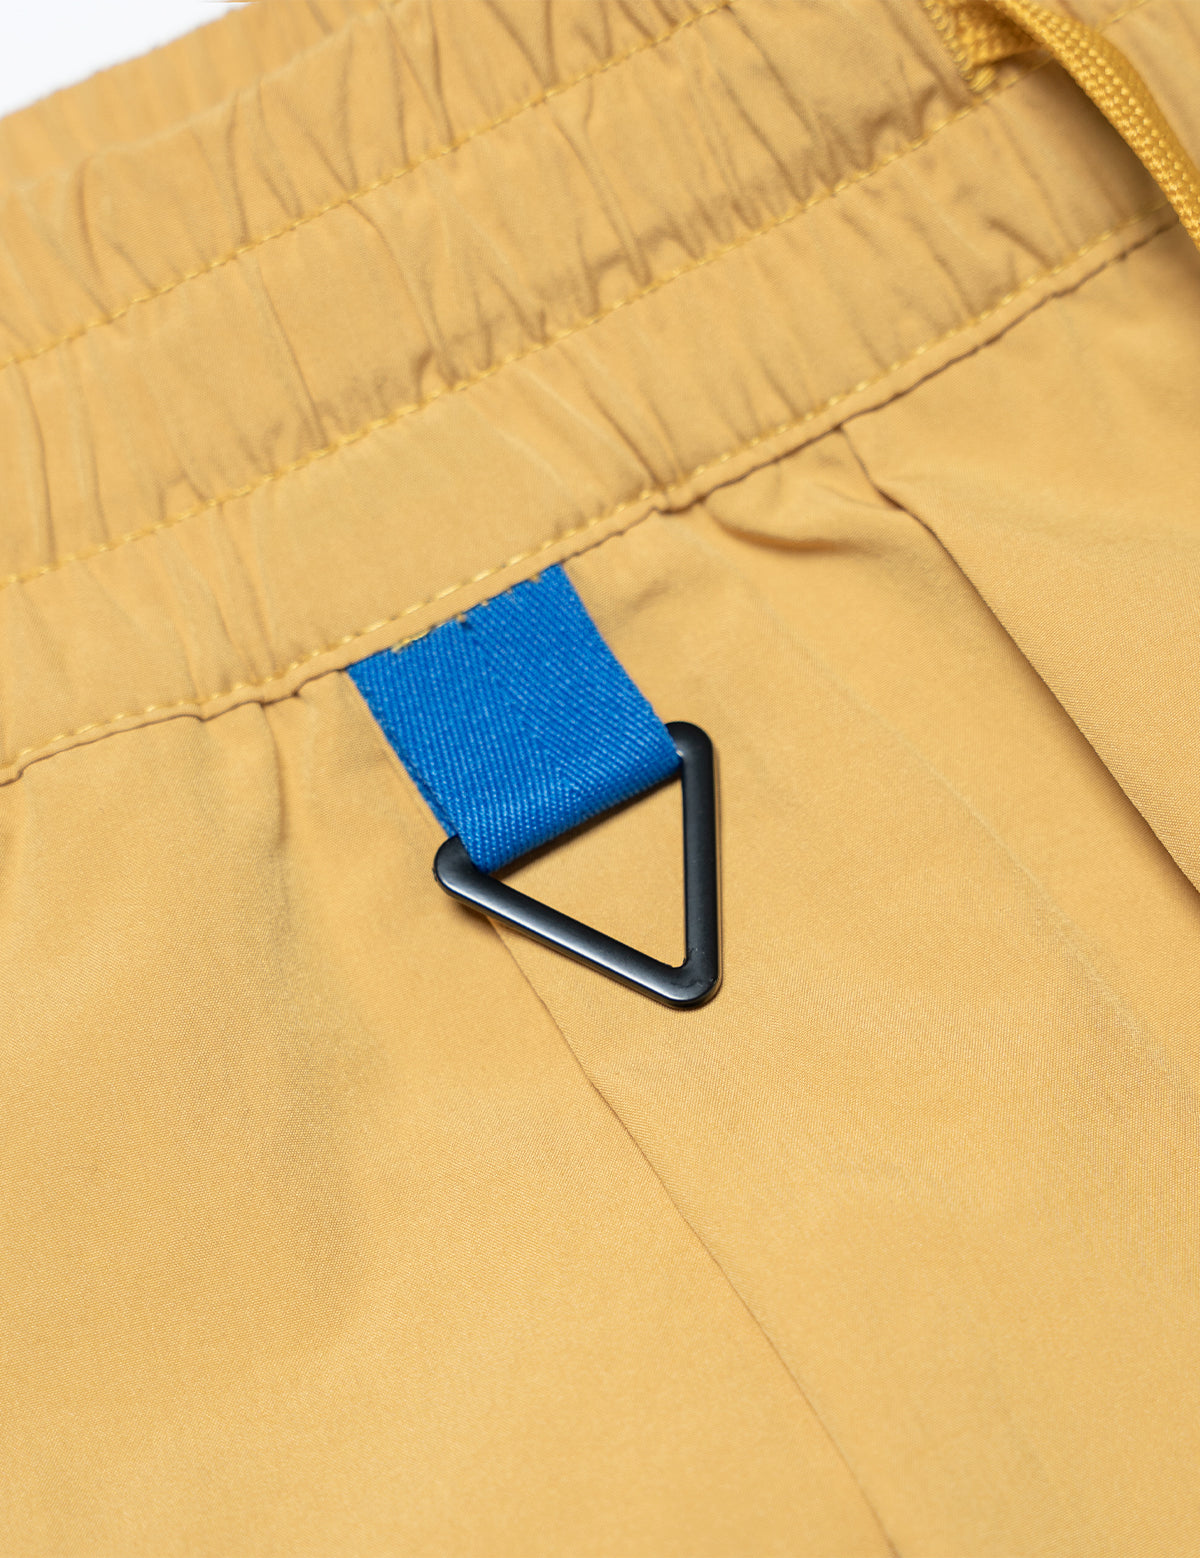 RELAXED FUNCTIONAL SHORTS YELLOW